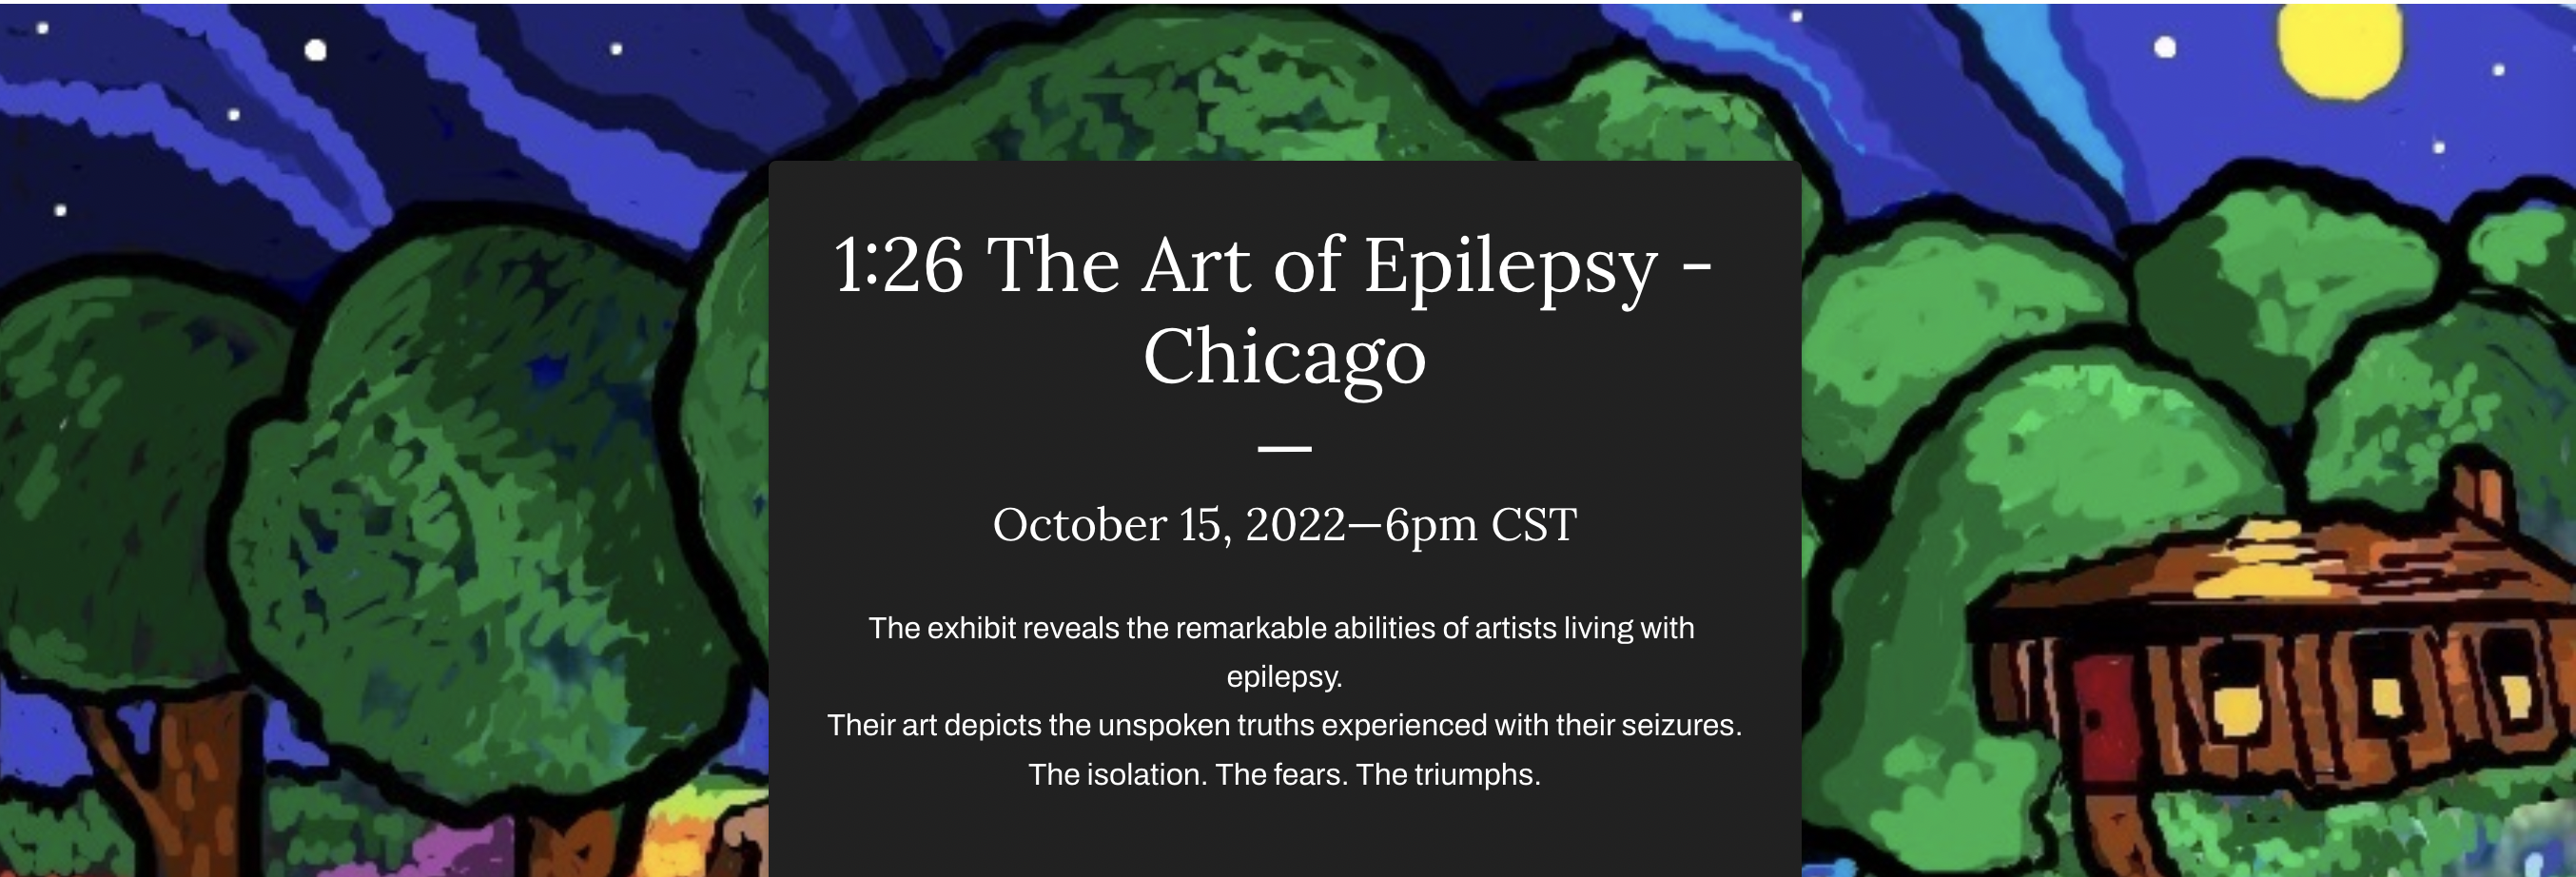 Artwork in the background of fundraising epilepsy event information